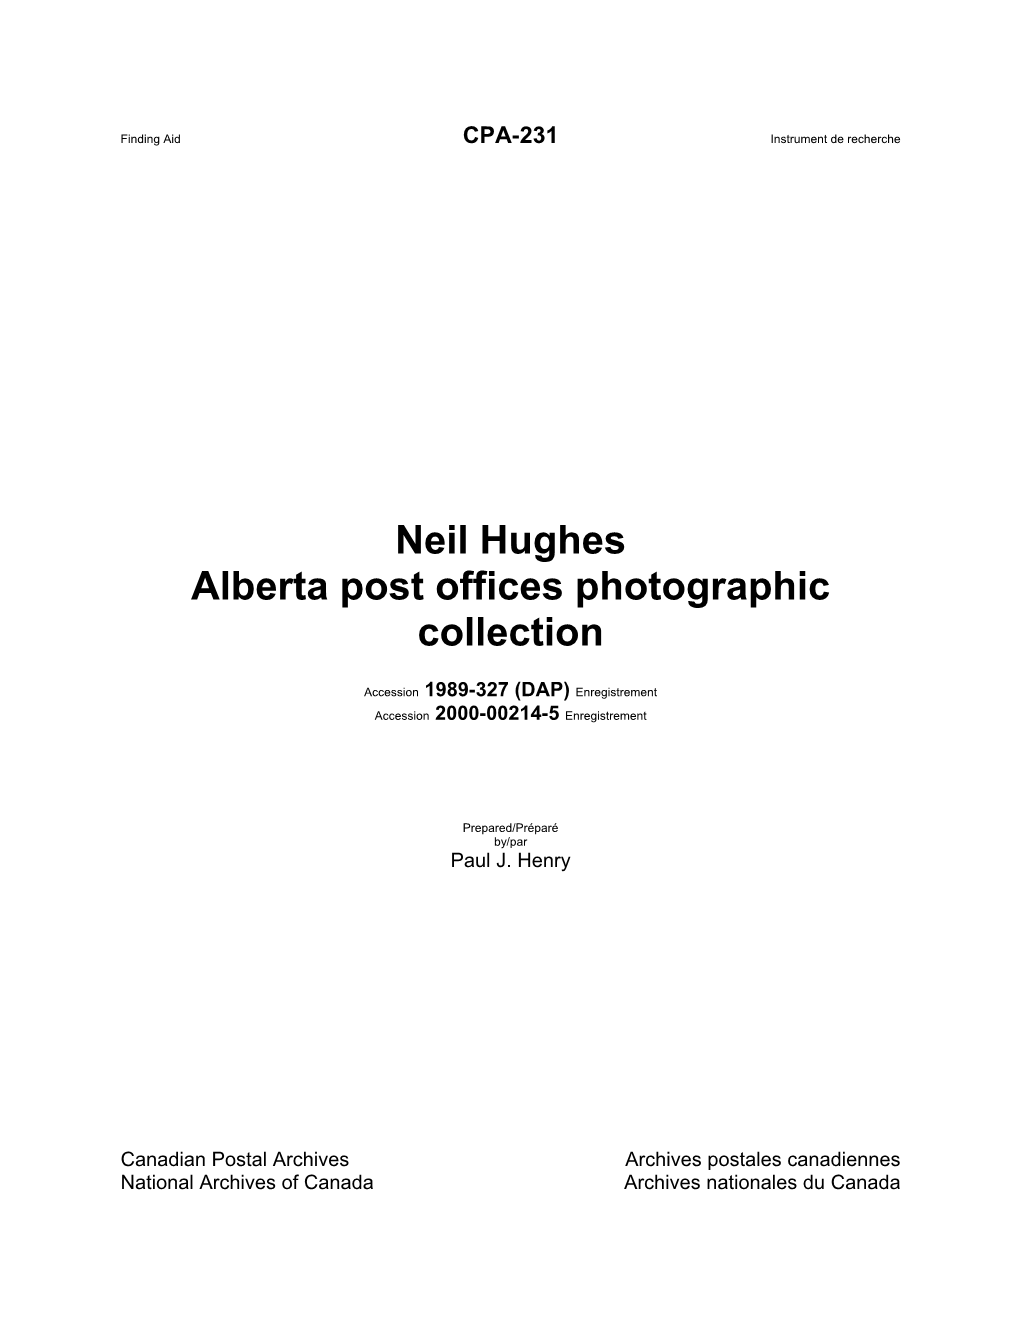 Neil Hughes Alberta Post Offices Photographic Collection